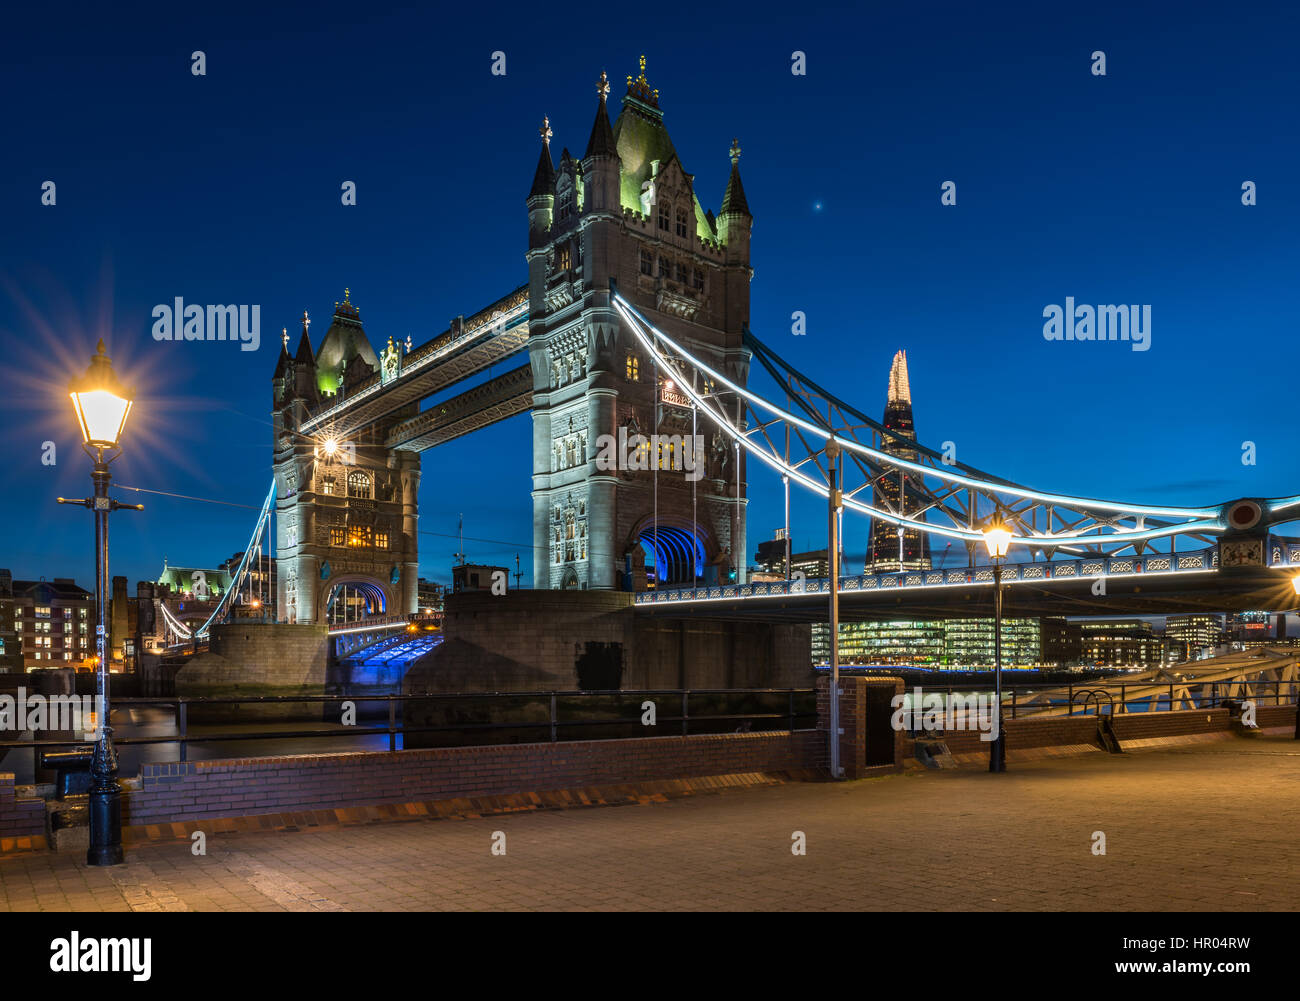 The lights come on at dusk on Tower Bridge on a calm but cold night in the capital city of London. Stock Photo